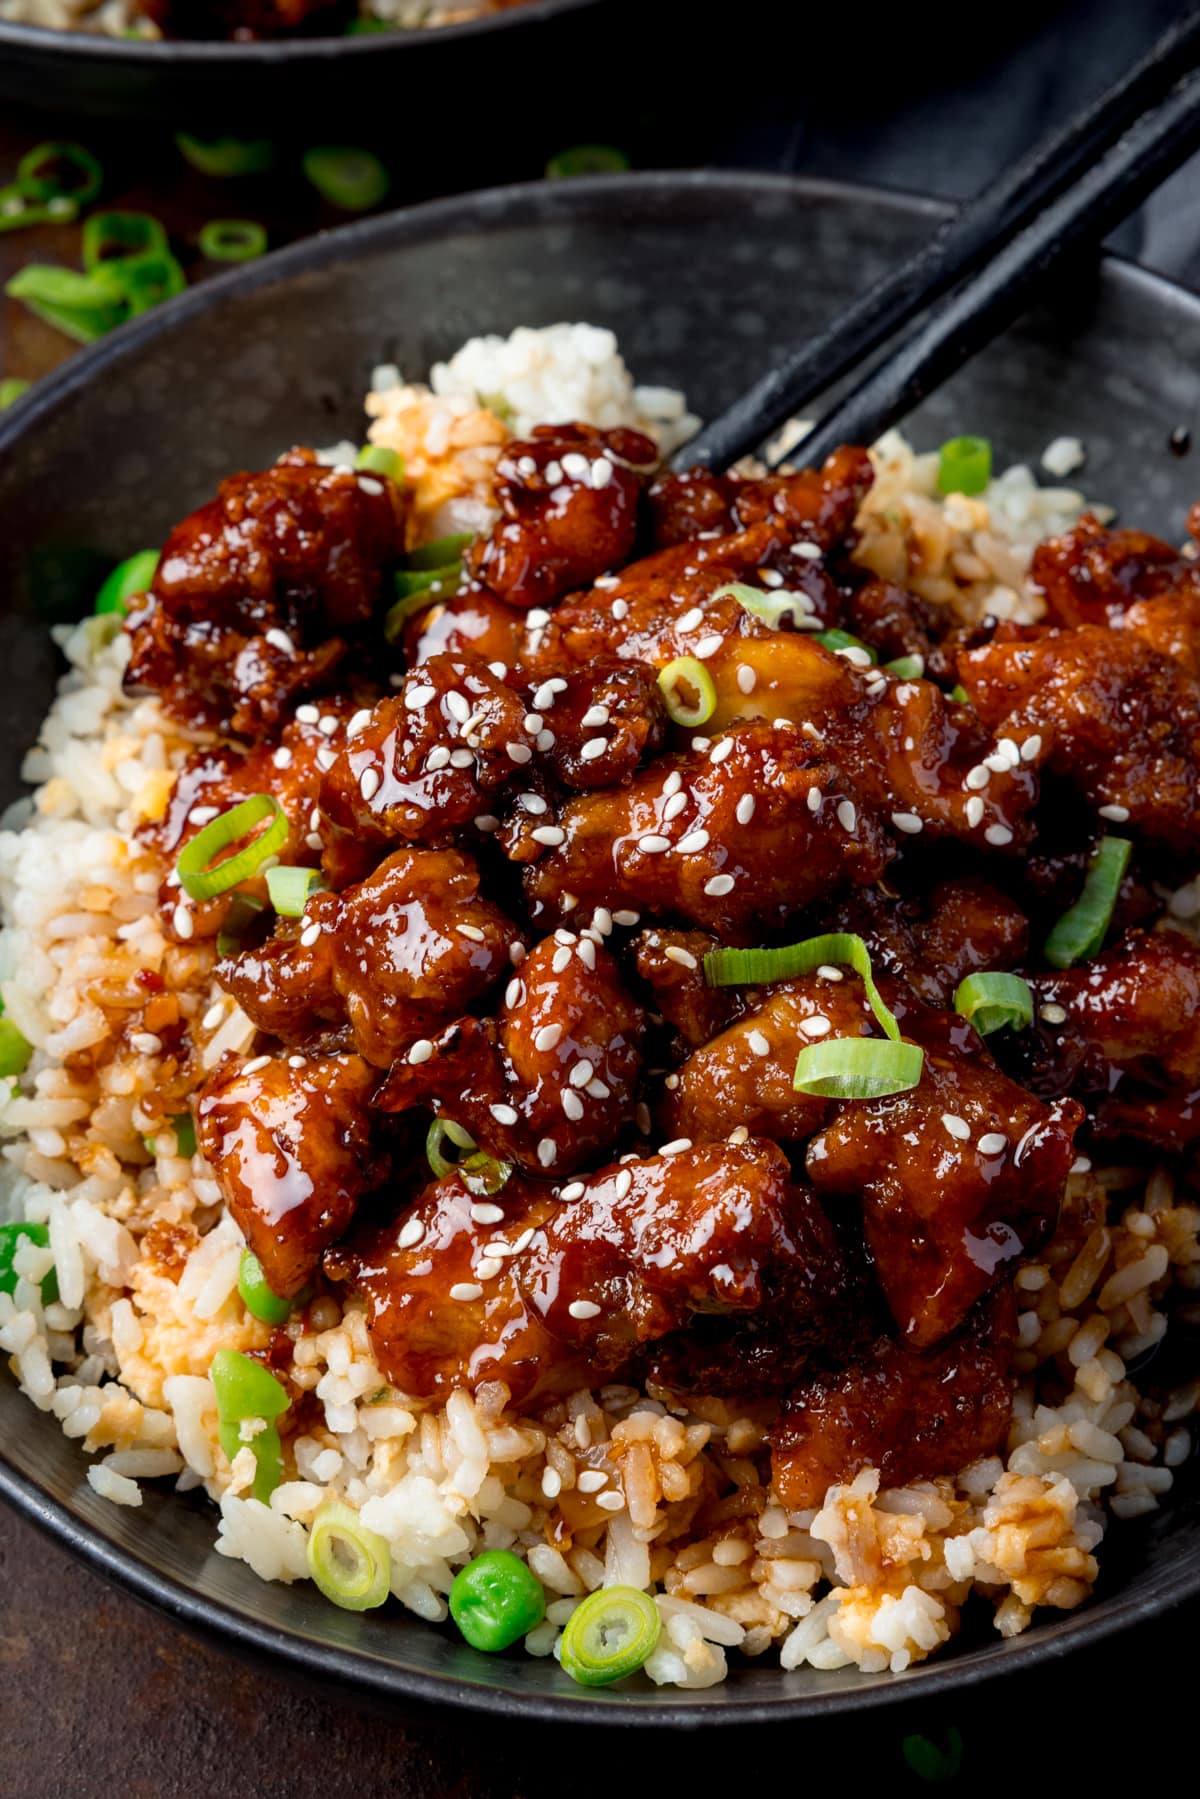 Tall close-up image of air fryer sesame chicken served on a bed of egg fried rice in a black bowl. The sesame chicken is topped with sesame seeds and spring onions. There is a pair of black chopsticks sticking out of the bowl. The bowl is on a dark background.